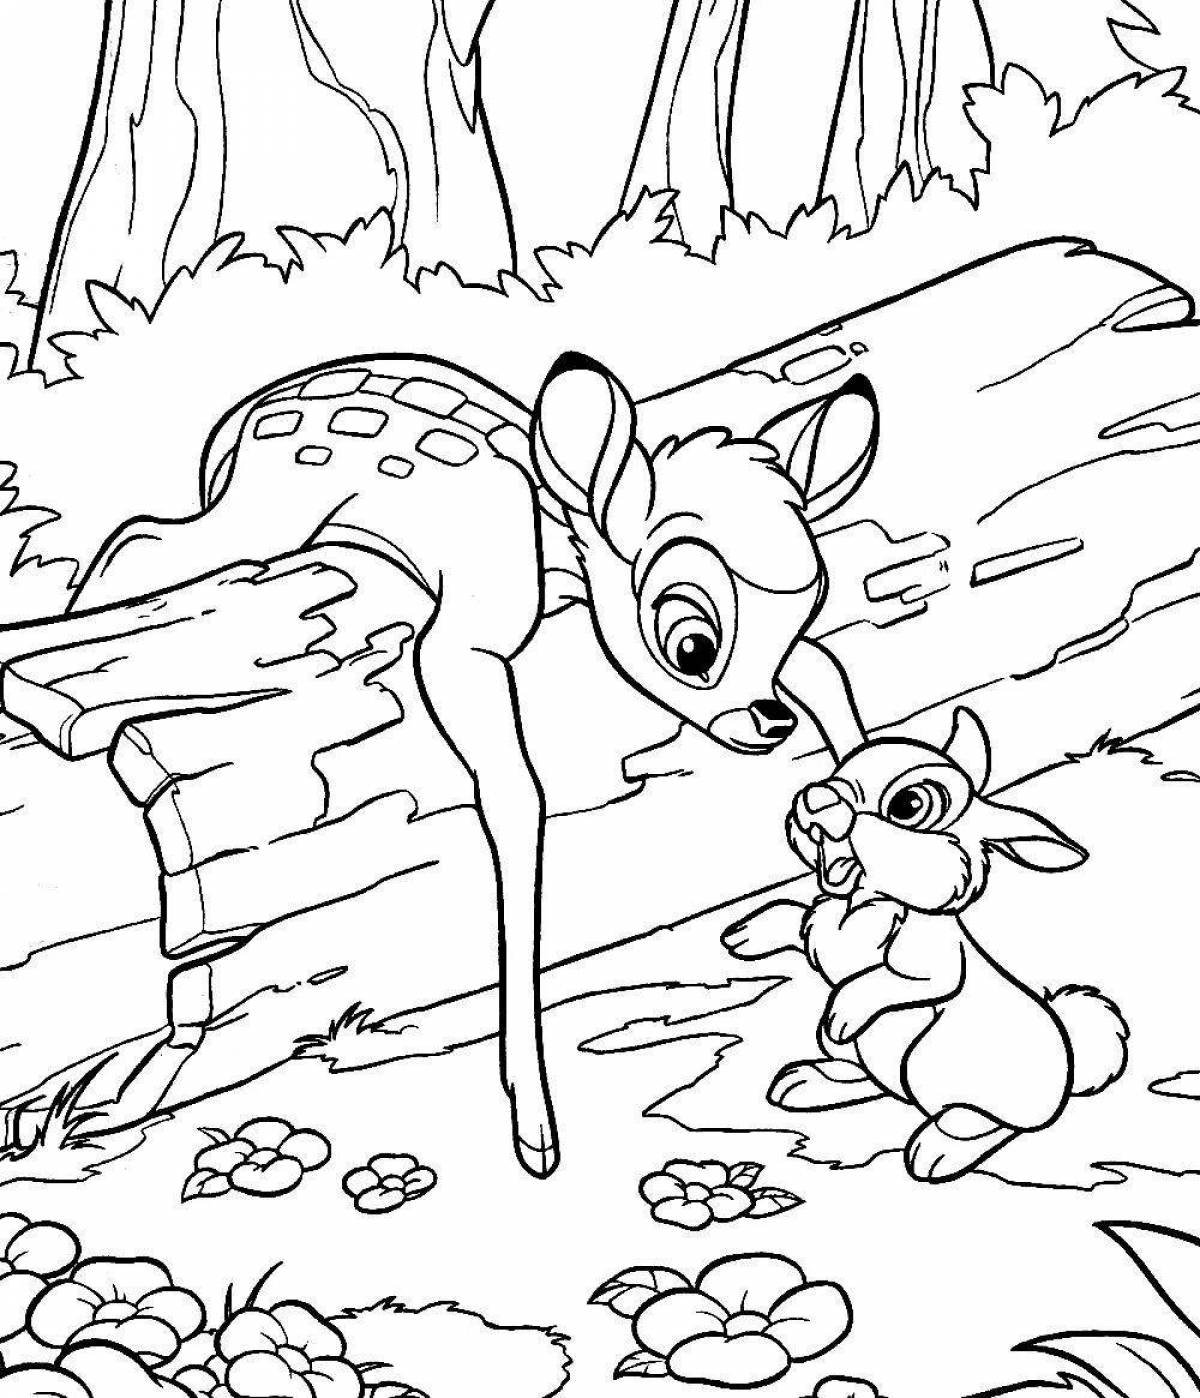 Painting nature and animals coloring page